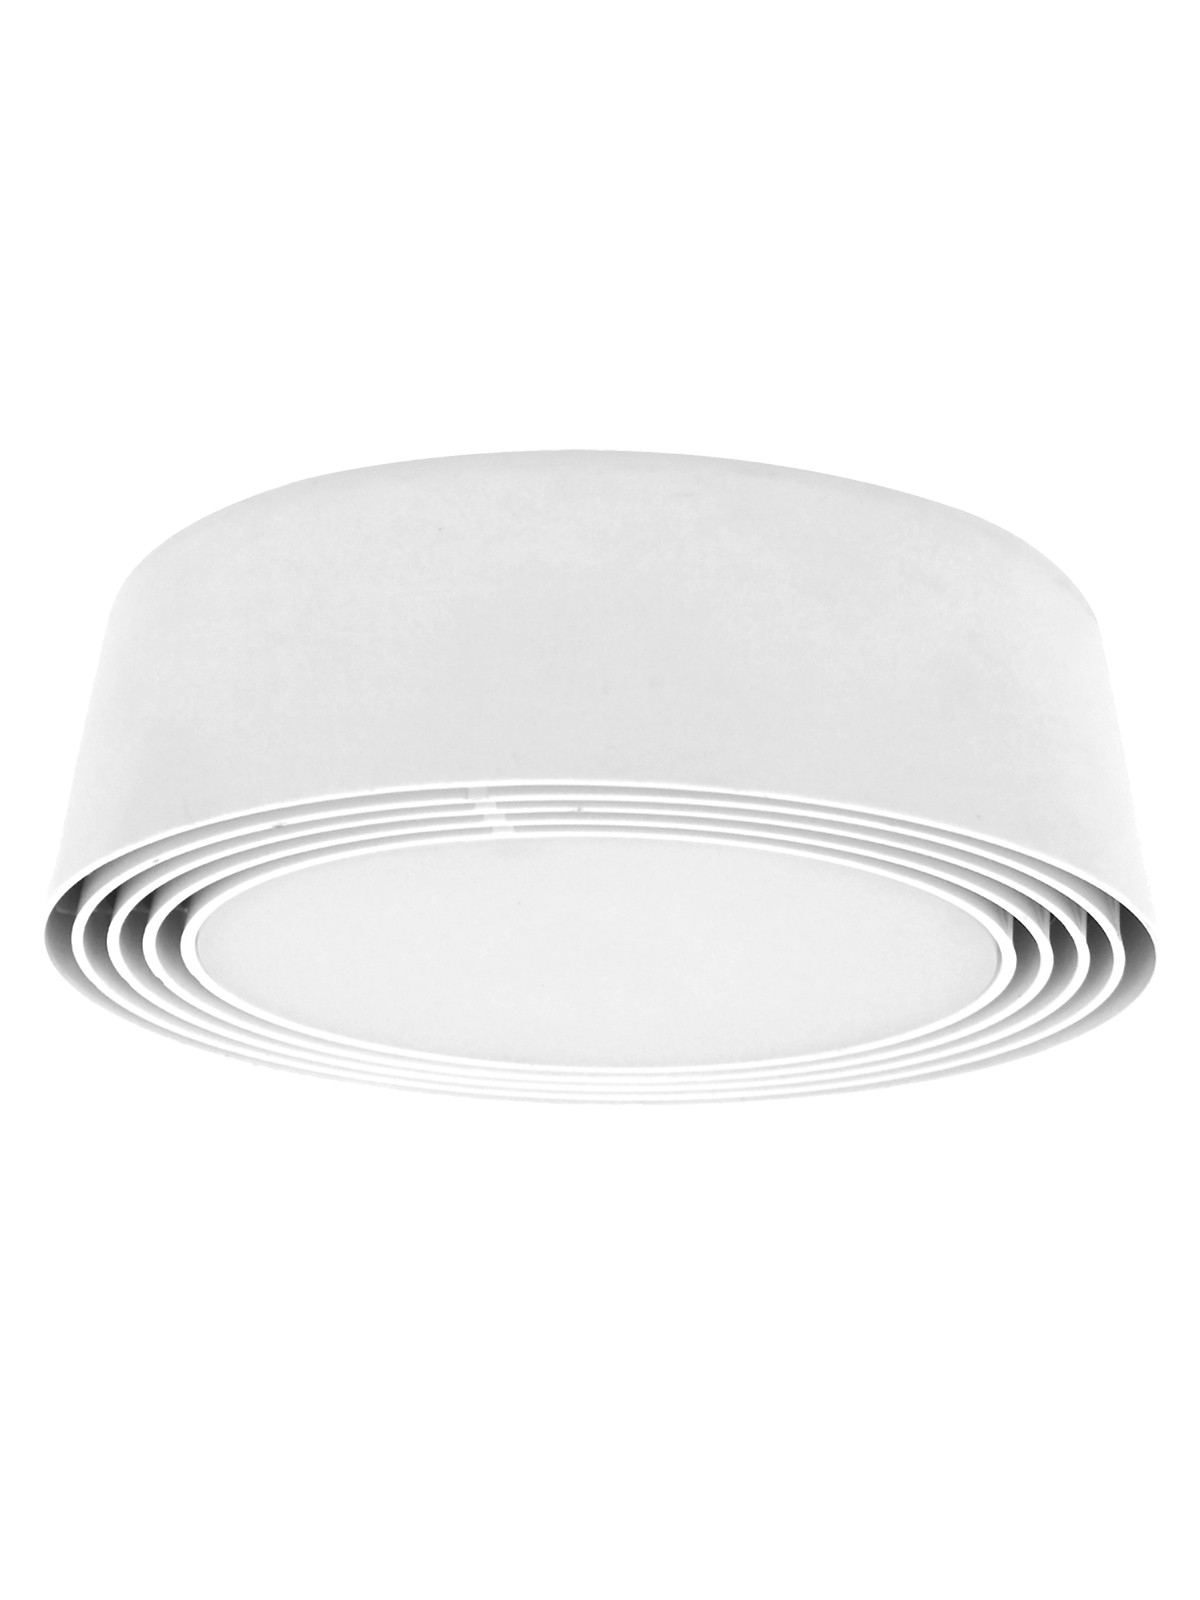 Puma Round 170mm Exhaust Fan With Led Light In White in sizing 1200 X 1600